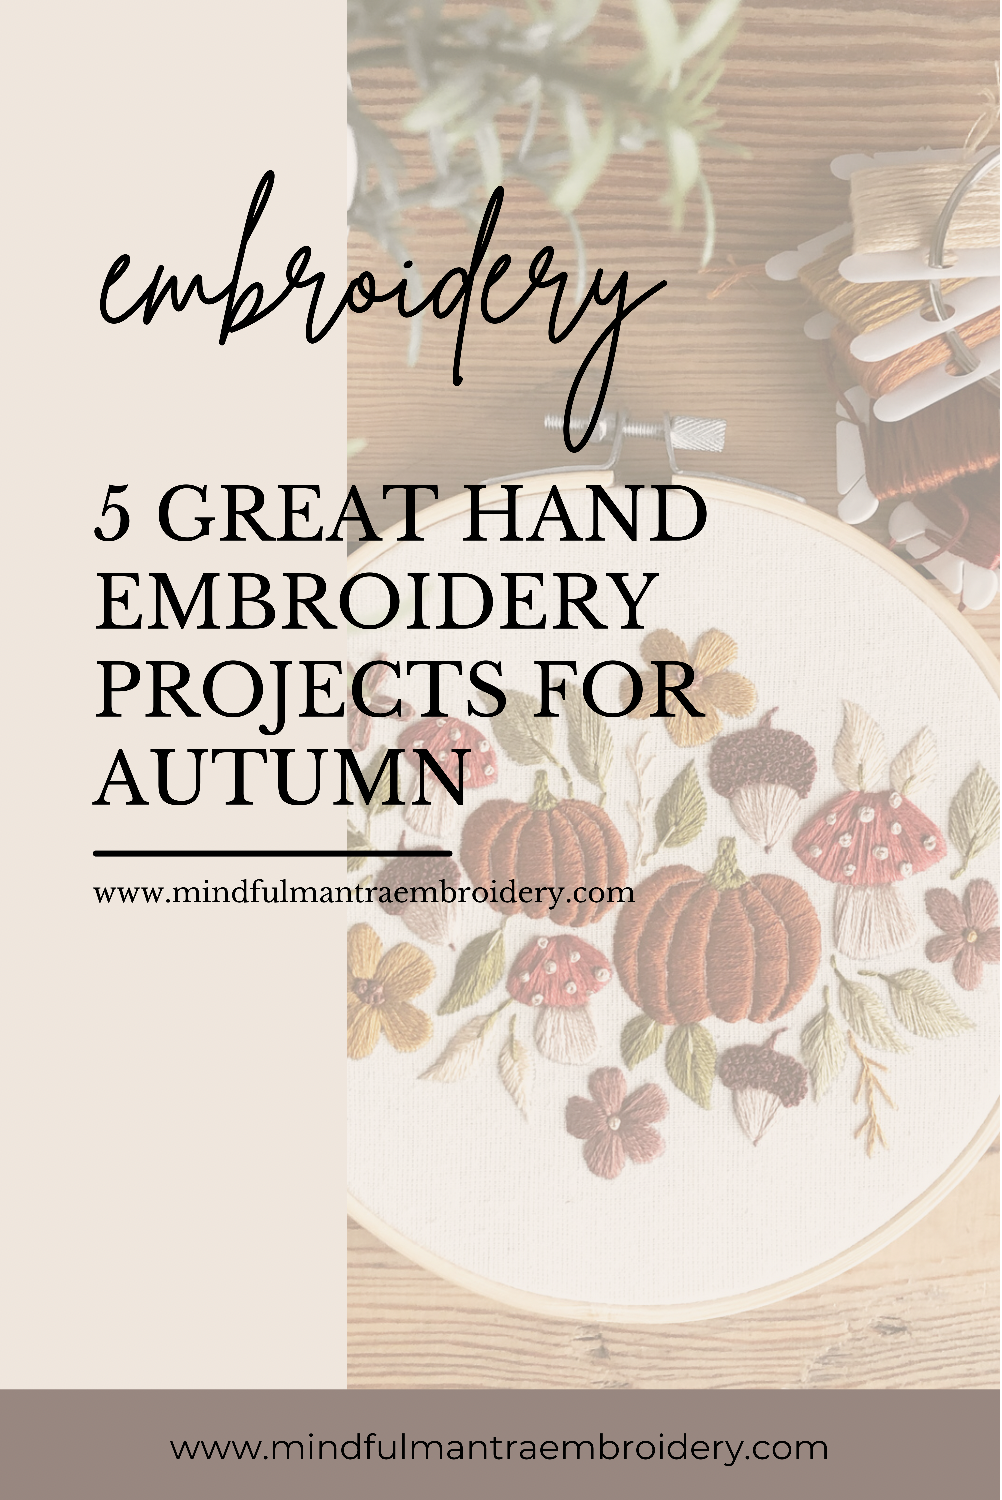 Embrace Autumn with 5 Creative Projects from Mindful Mantra Embroidery